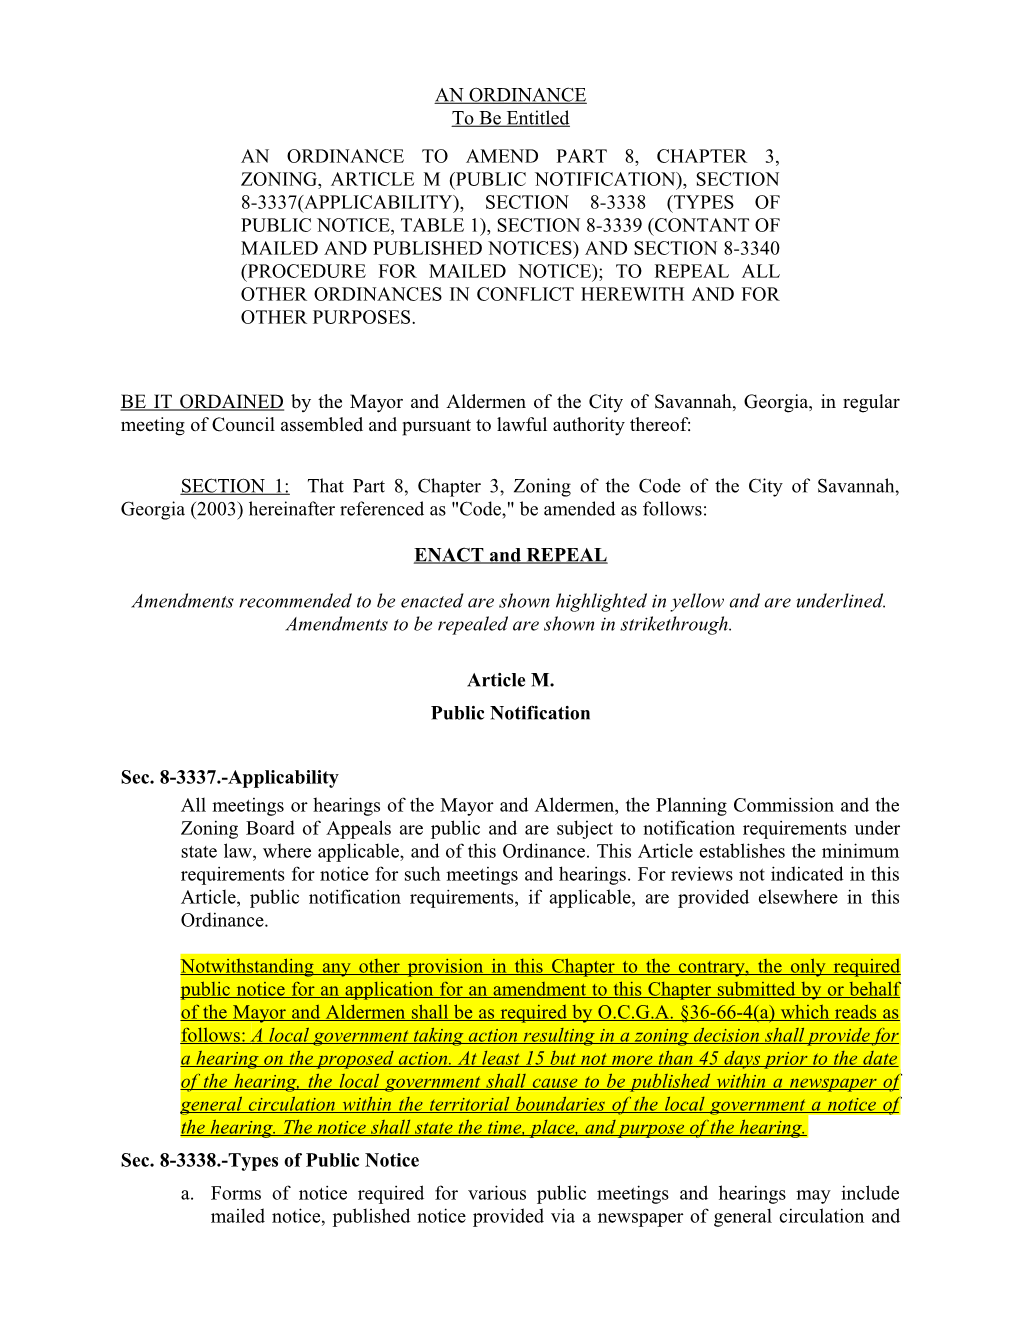 An Ordinance to Amend Part 8, Chapter 3, Zoning, Article M (Public Notification), Section